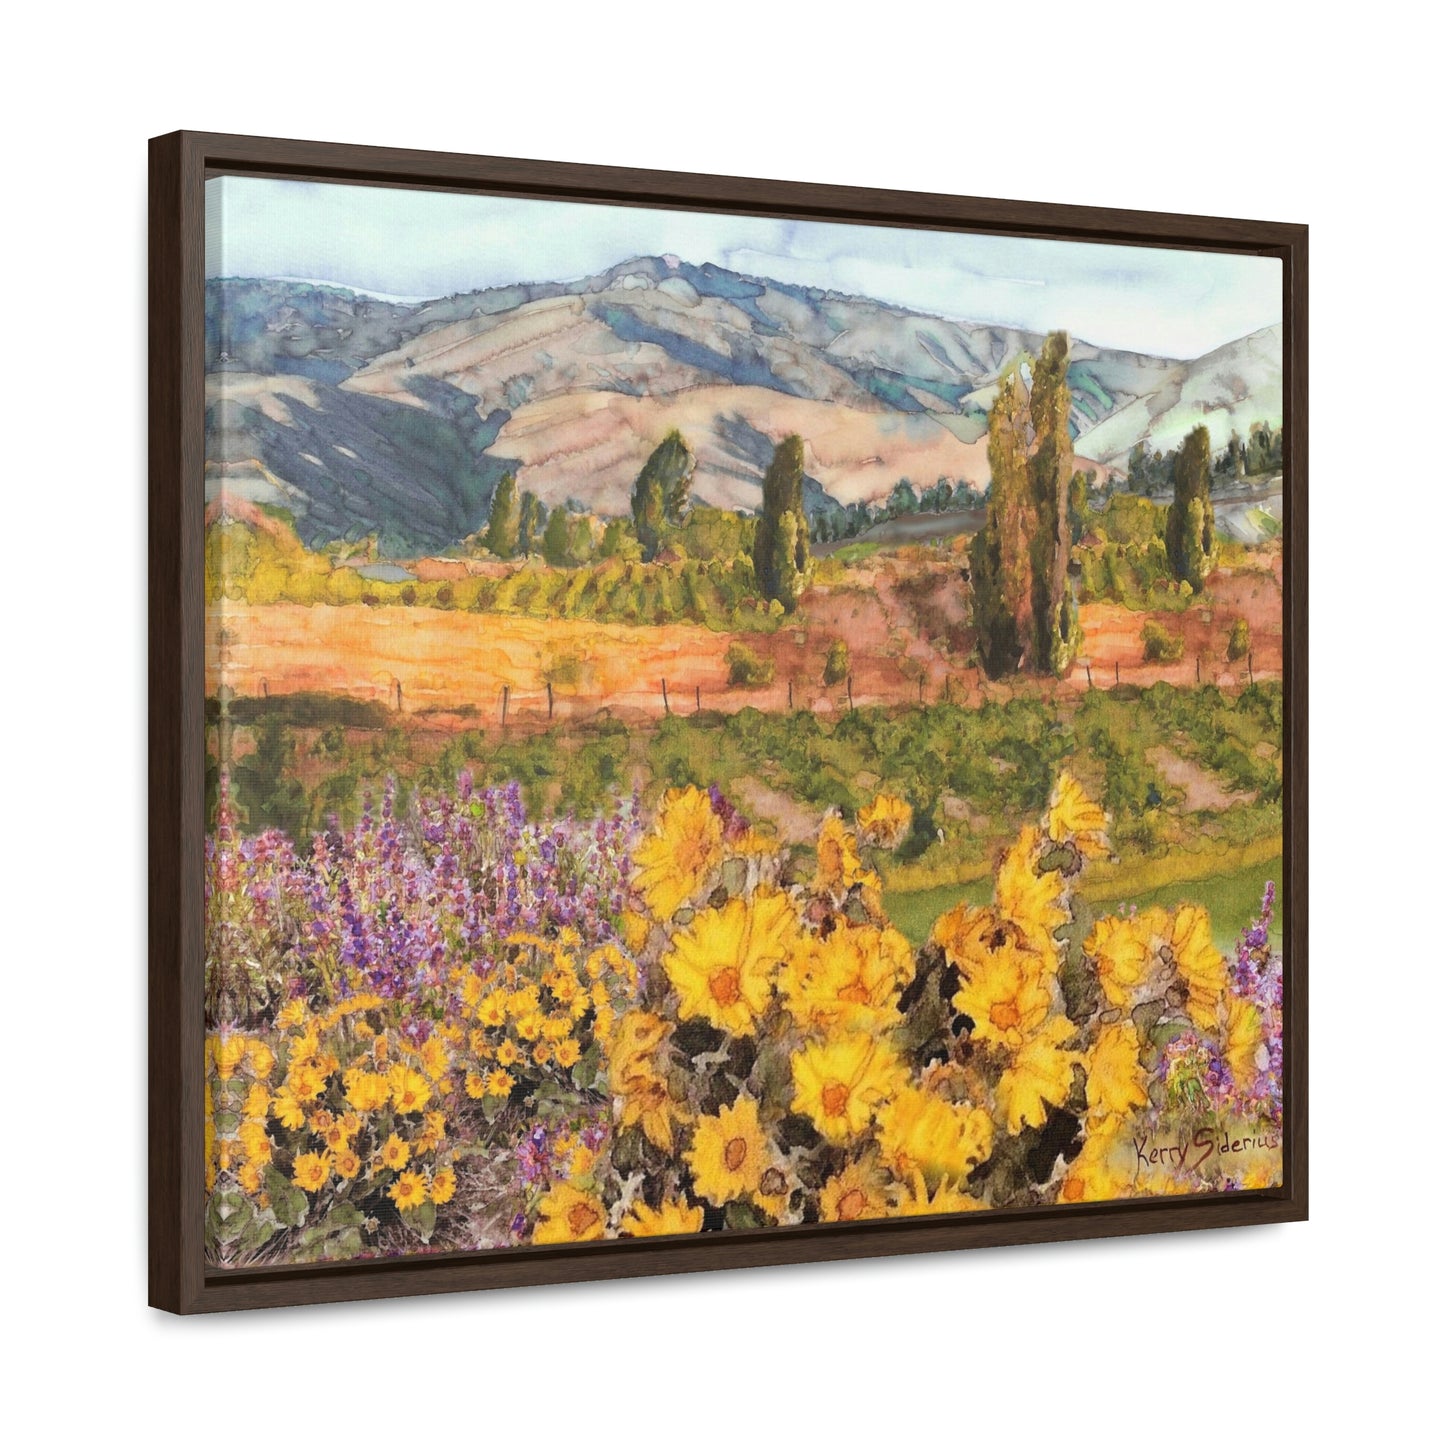 "Chelan Vineyard with Balsom" Wood-Framed Gallery Canvas Wrap - Kerry Siderius Art 